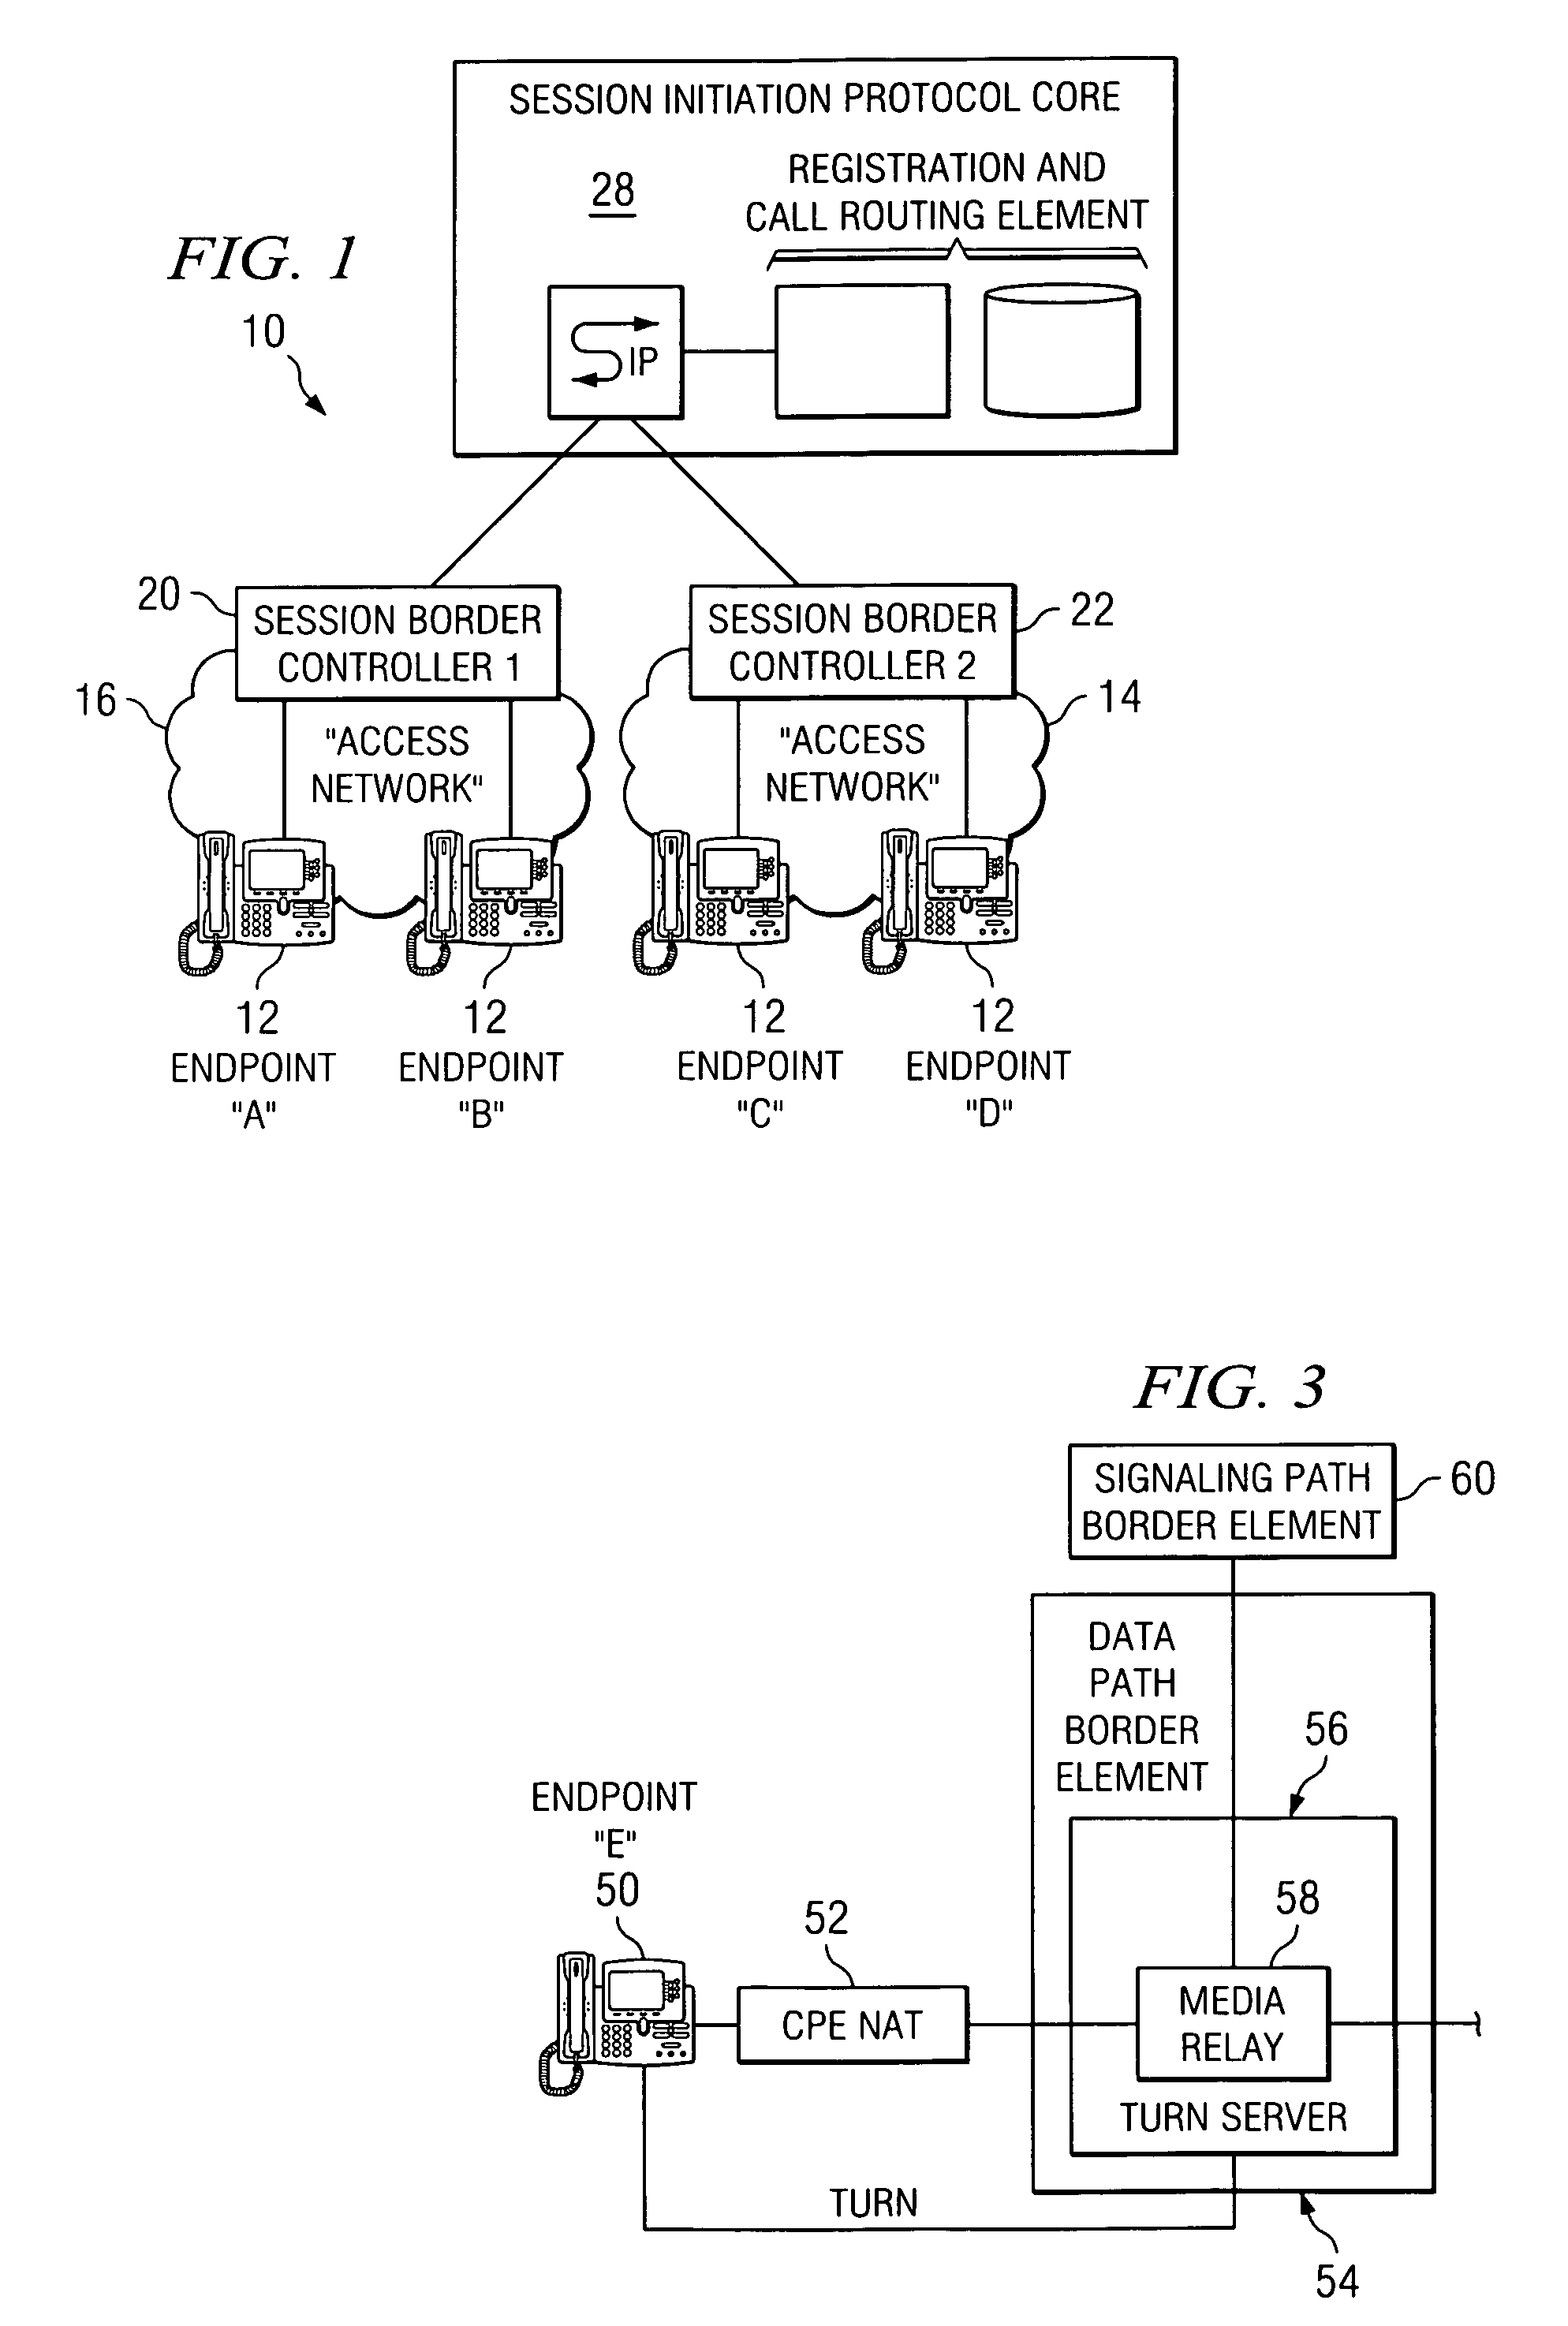 System and method for optimizing communications between session border controllers and enpoints in a network environment